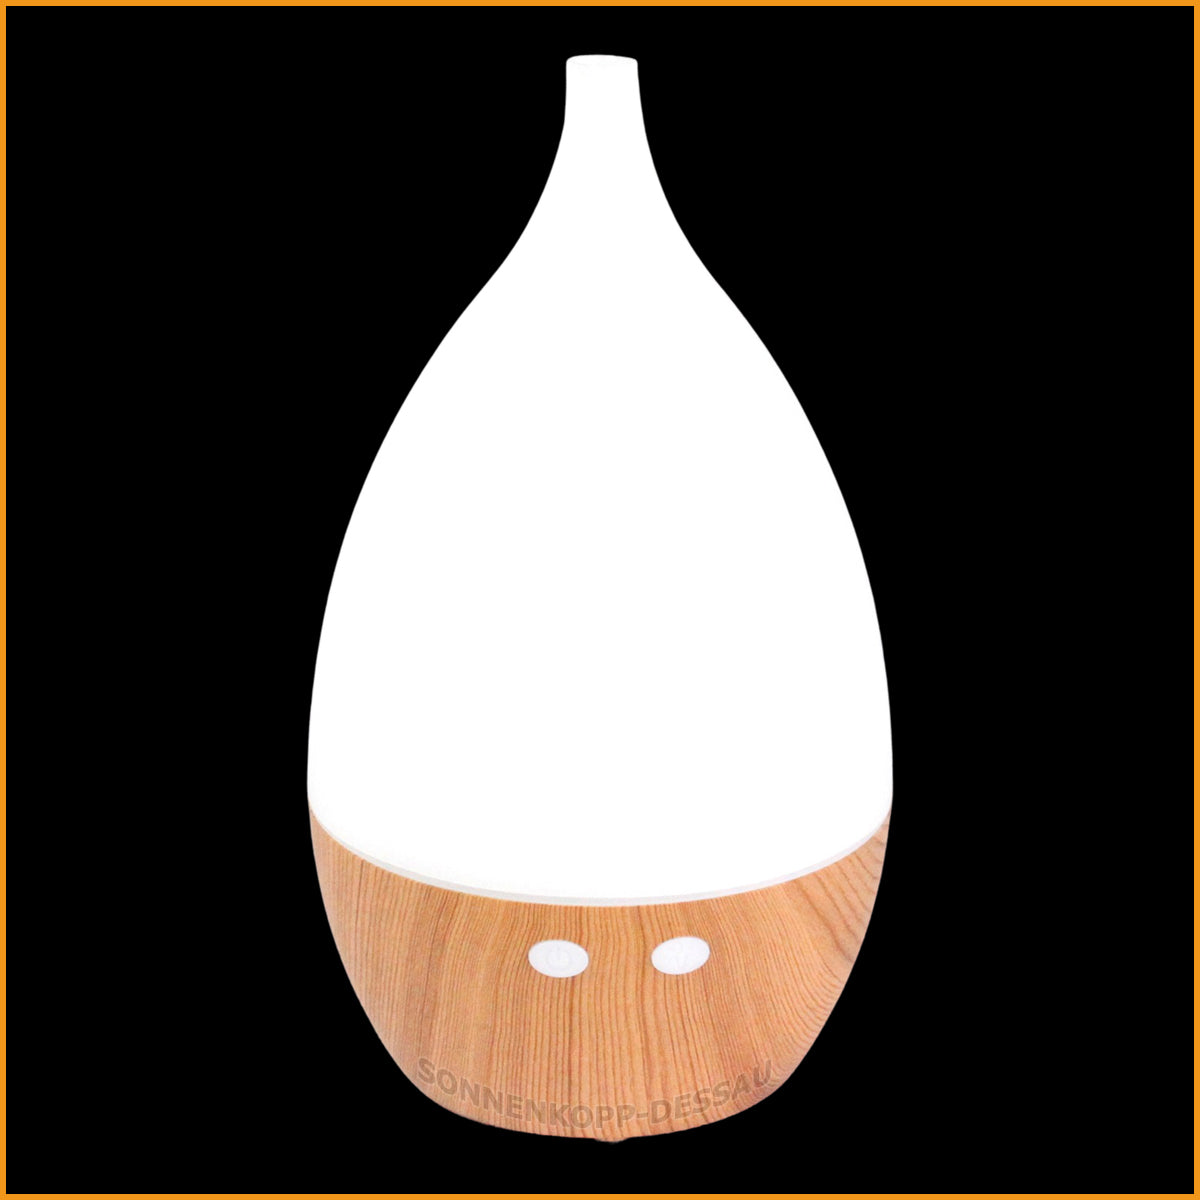 https://cdn.shopify.com/s/files/1/0380/1458/2916/products/aroma-diffuser-vase-weiss-tom-11-2.jpg?v=1599594308